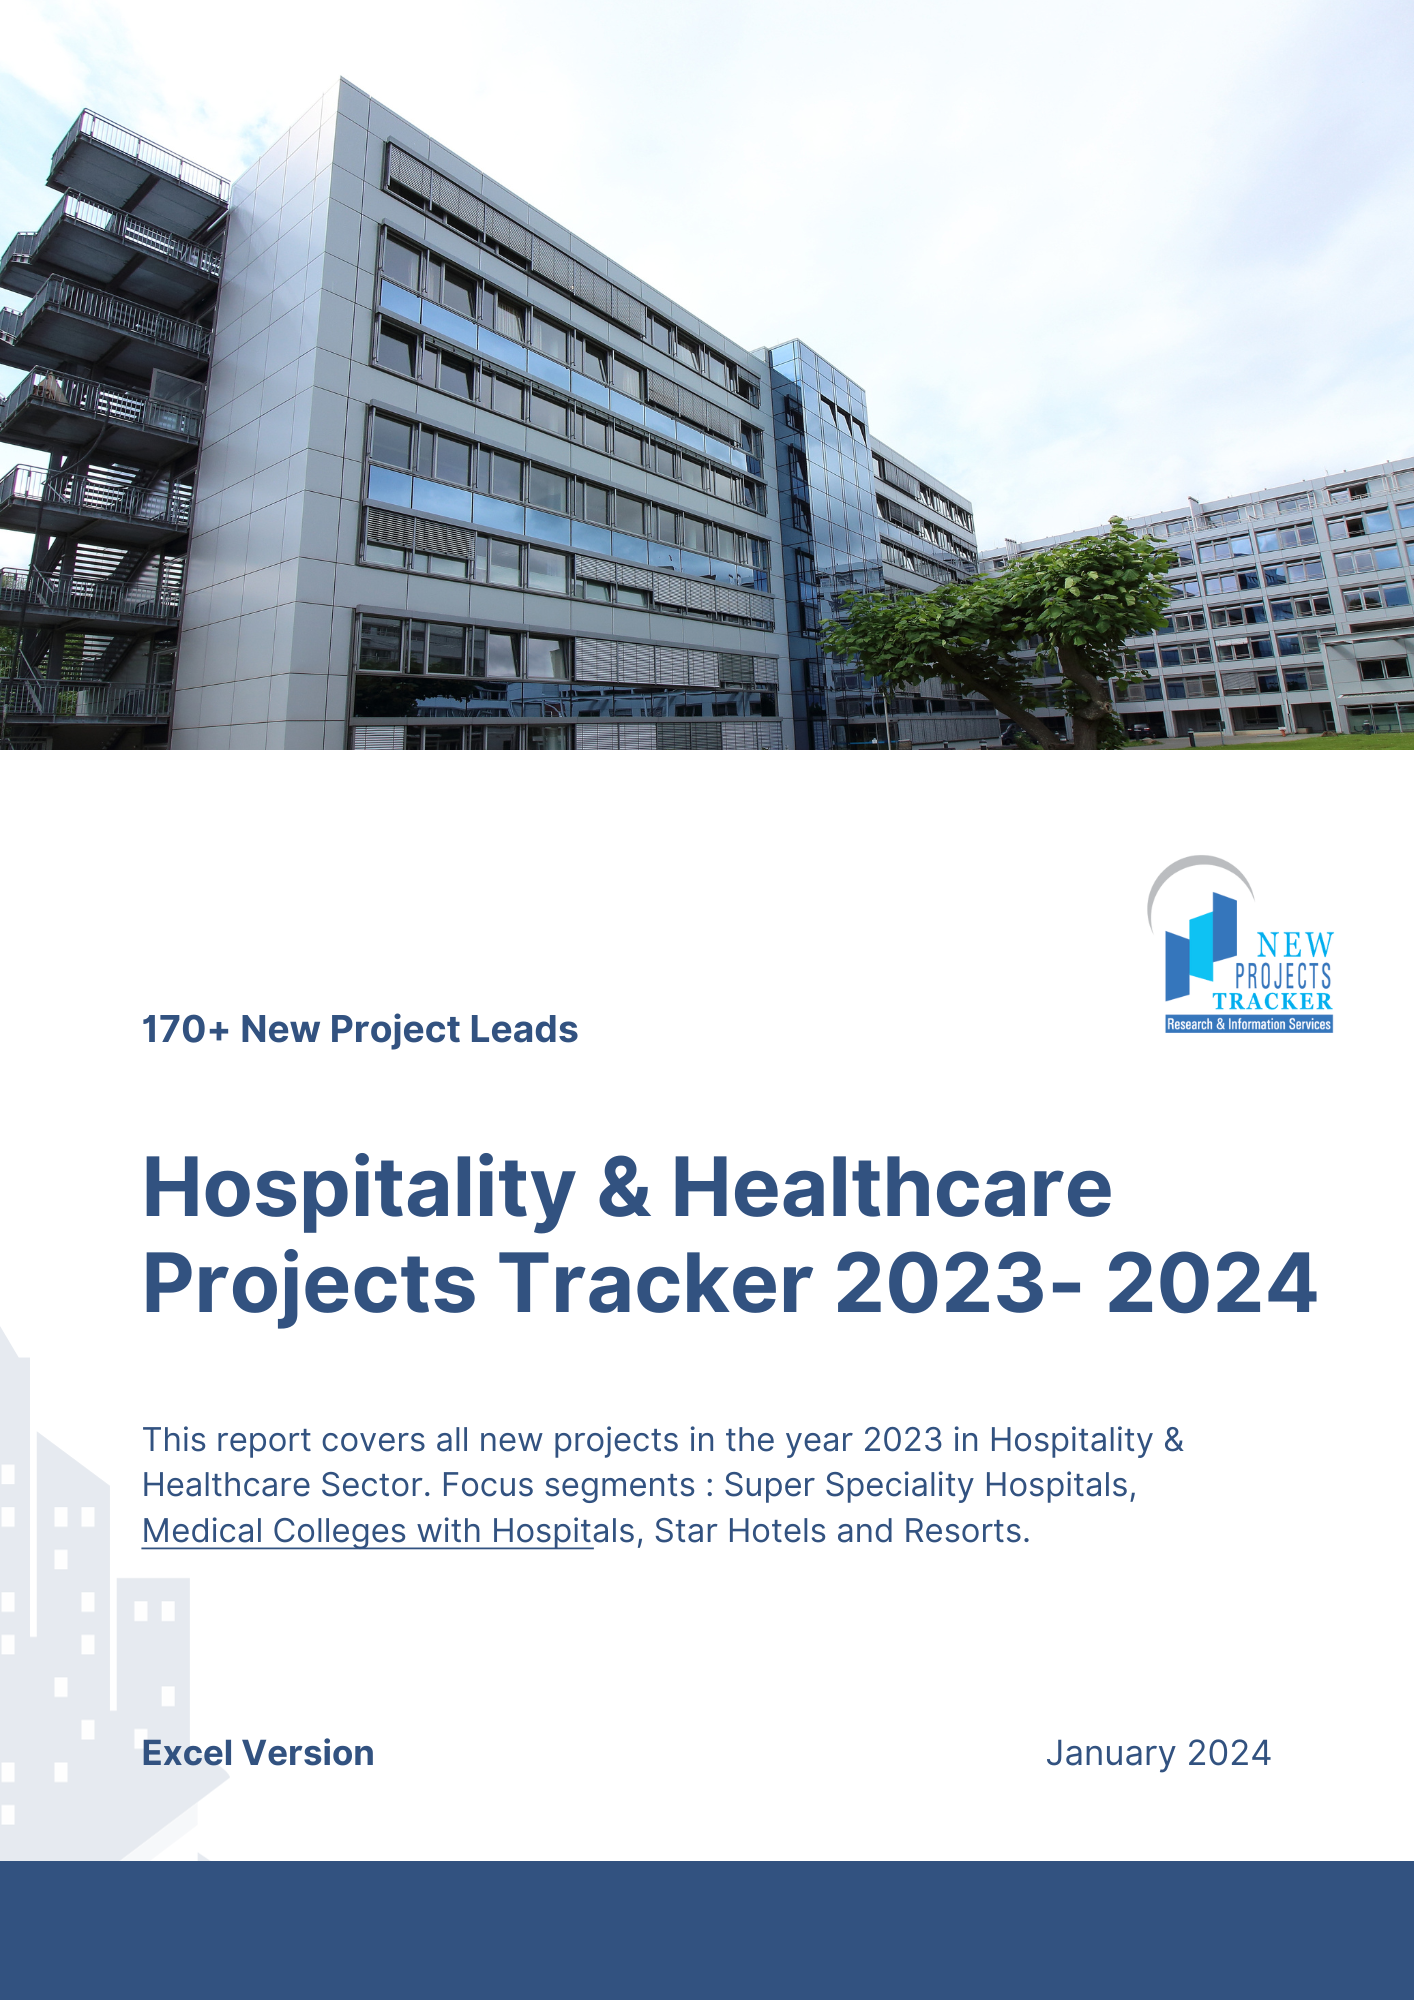 Hospitality & Healthcare Projects Tracker – 2023-2024